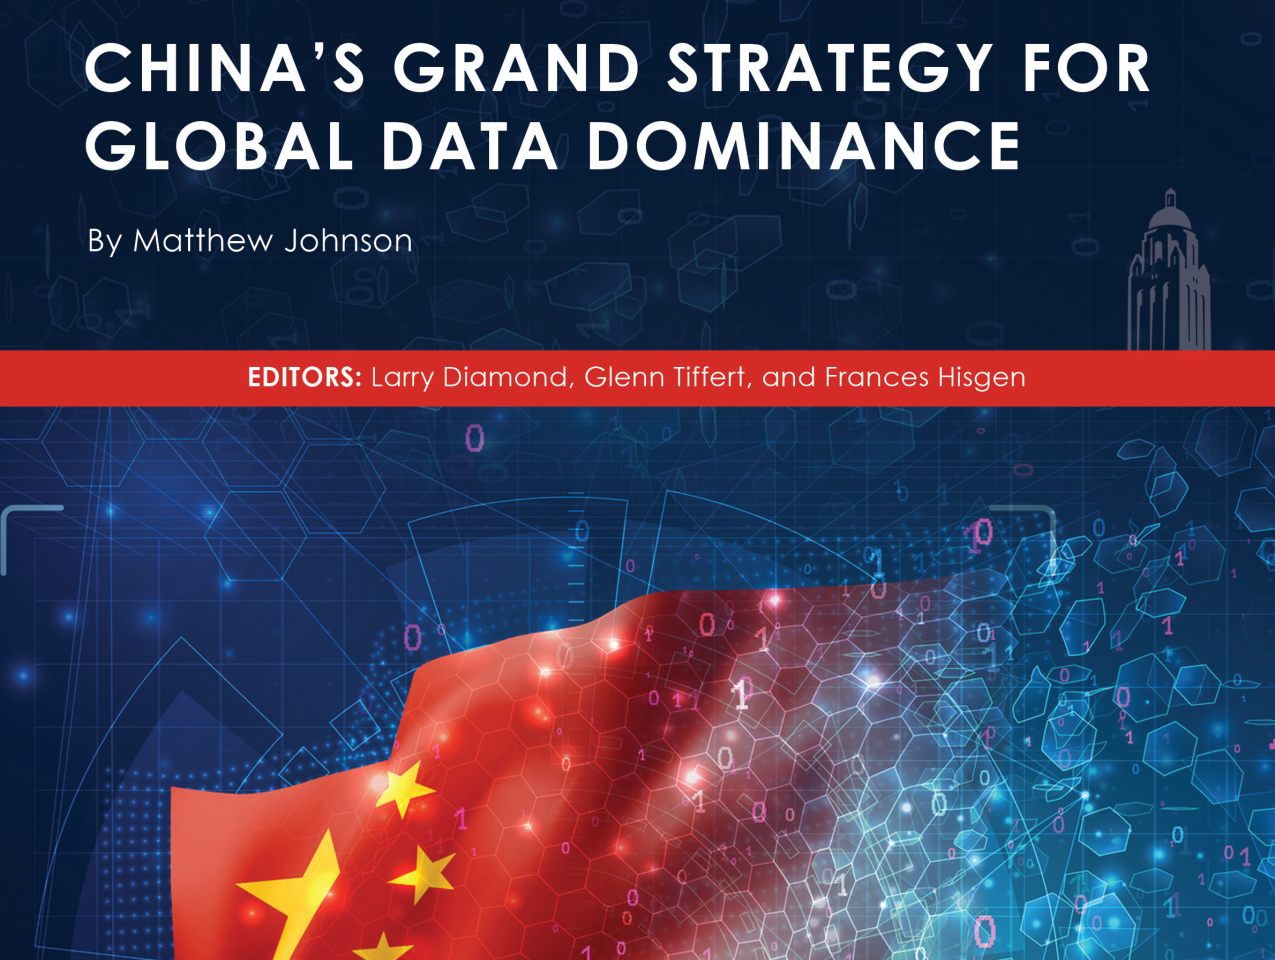 China's Grand Strategy for Global Data Dominance